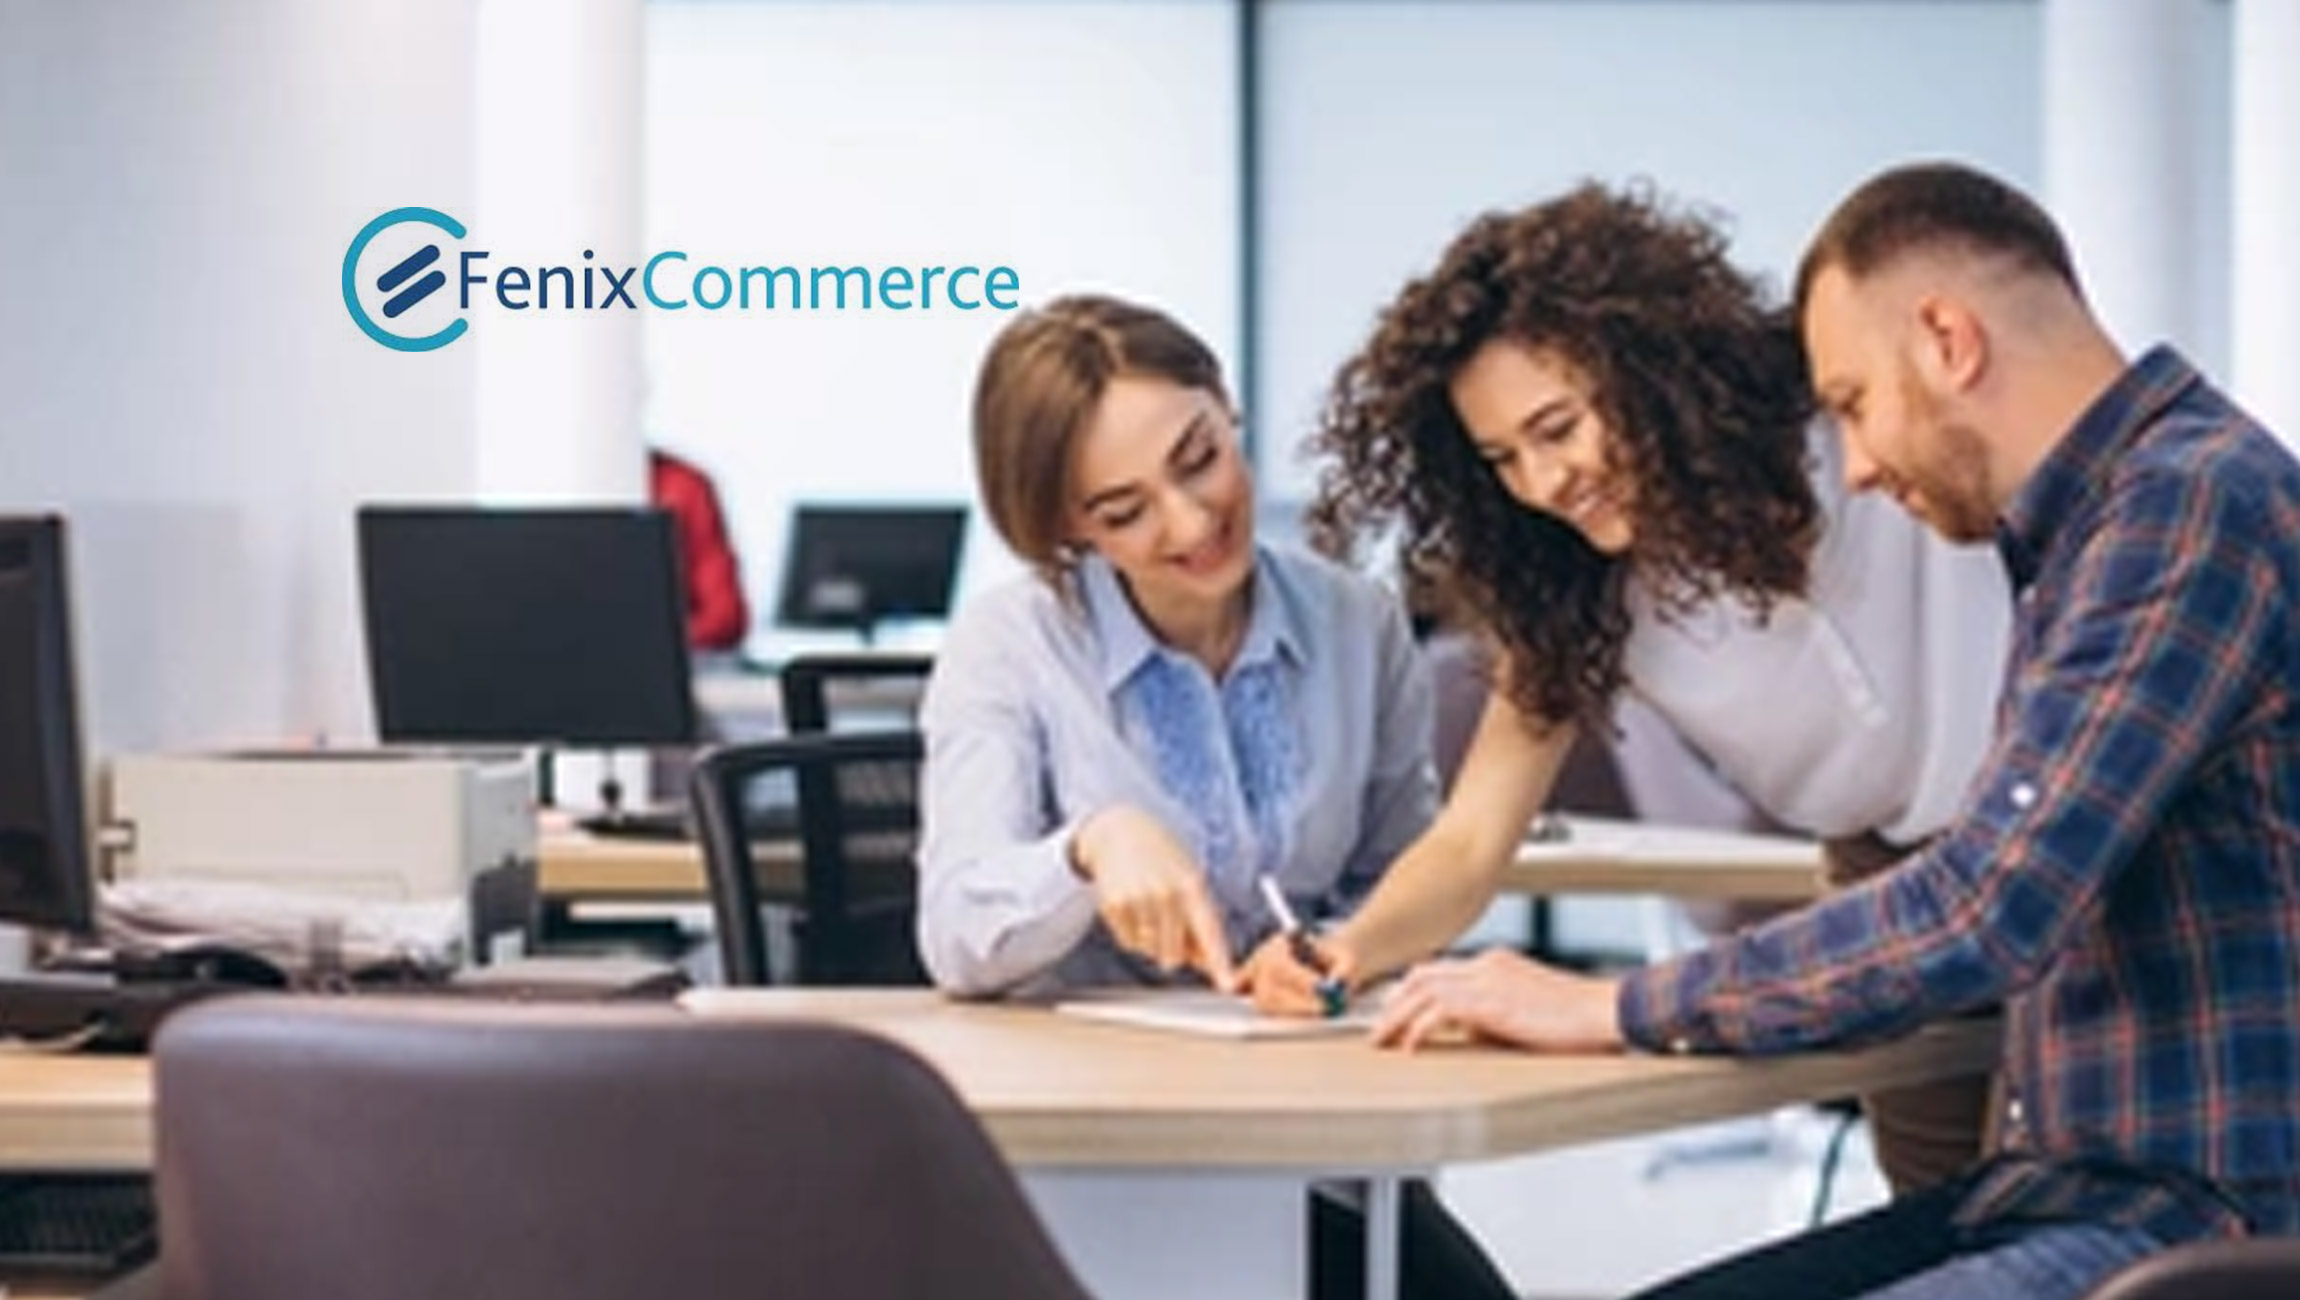 Fenix Commerce Delivers a New Look in Customer Experience for Tailored Brands